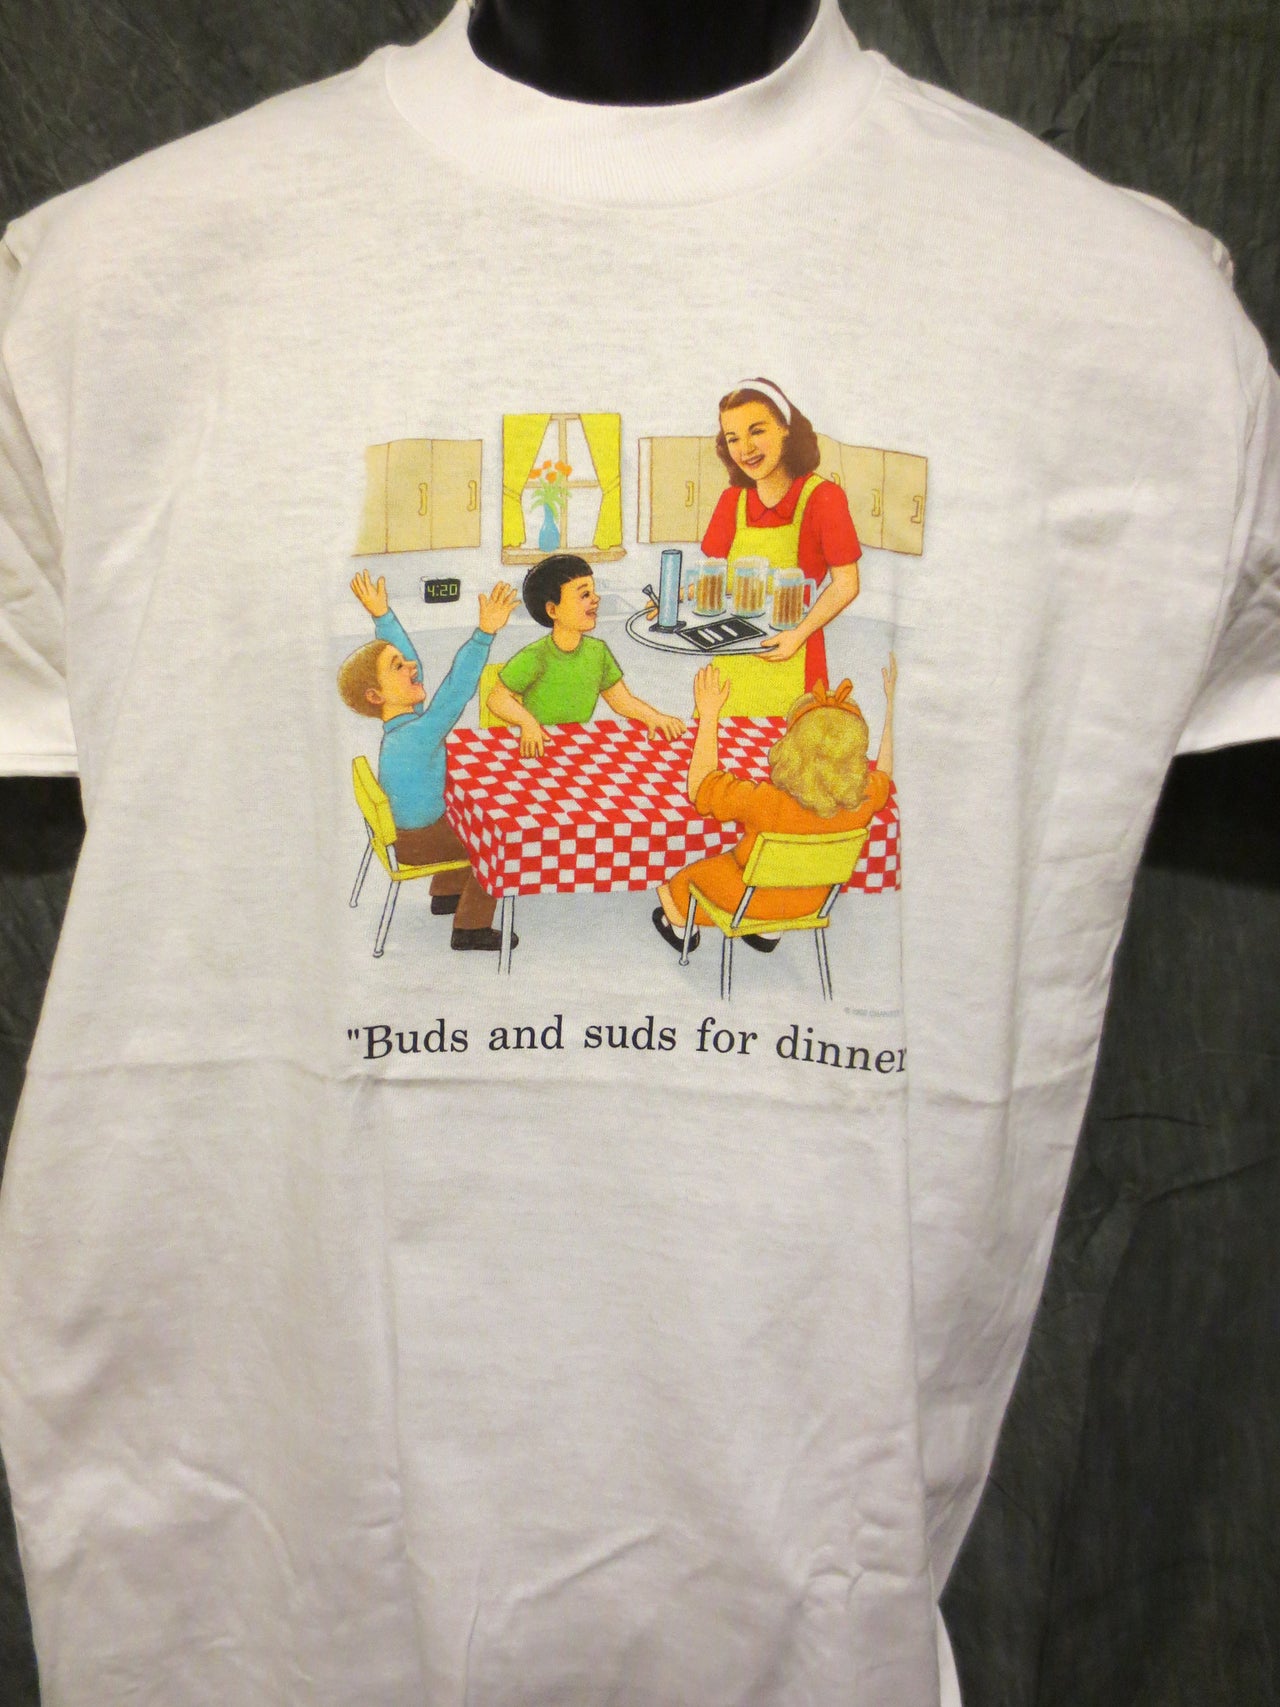 Childhood Buds and Suds for Dinner Adult White Tshirt - TshirtNow.net - 5